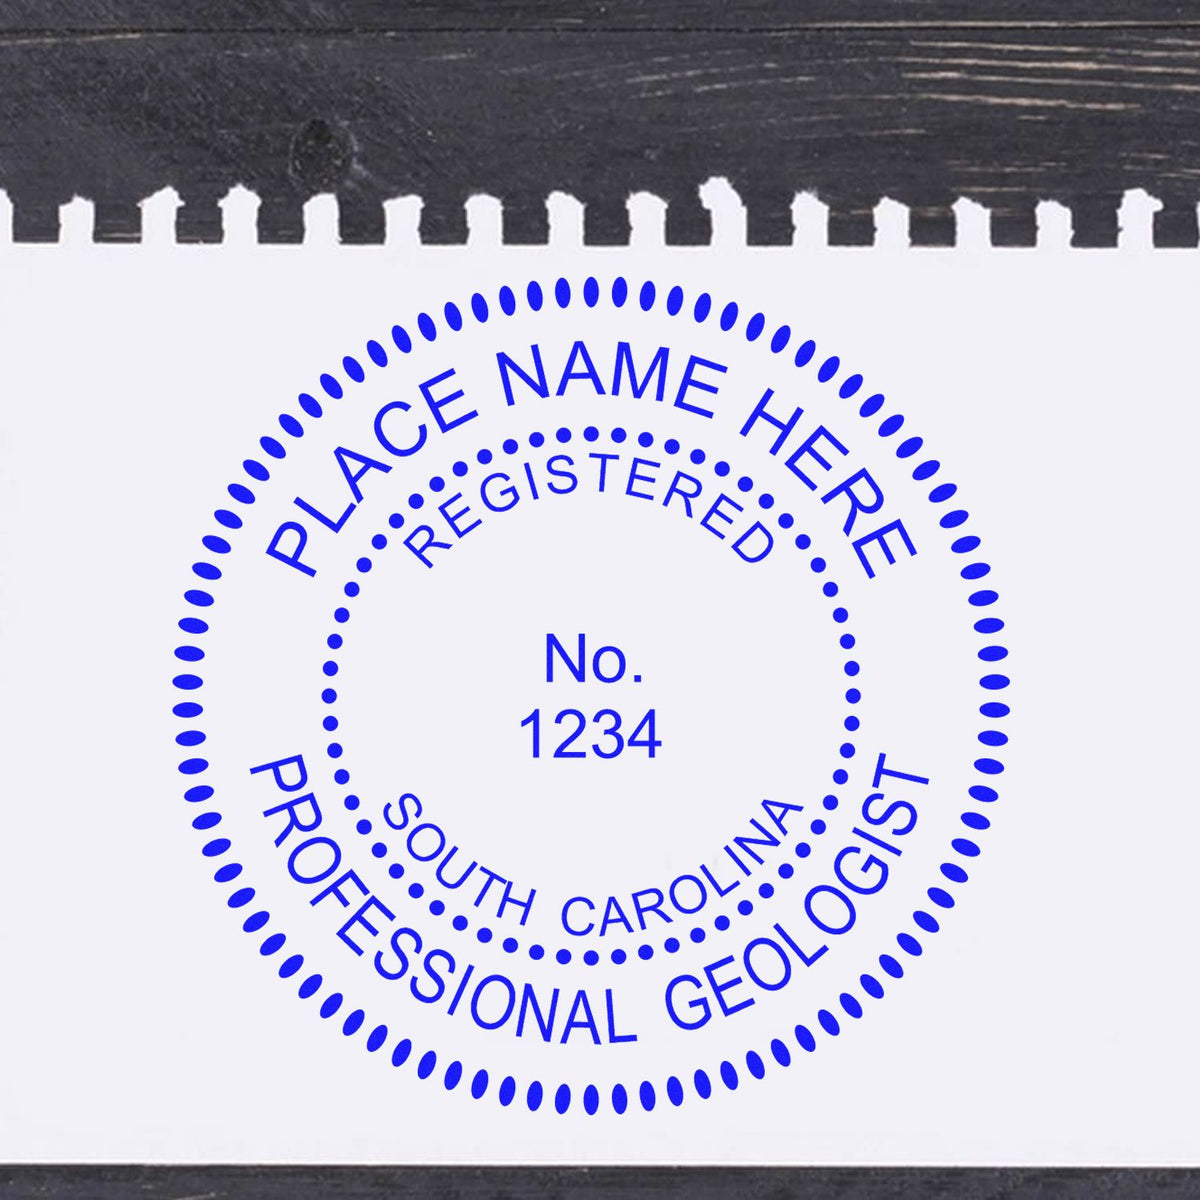 An alternative view of the Digital South Carolina Geologist Stamp, Electronic Seal for South Carolina Geologist stamped on a sheet of paper showing the image in use